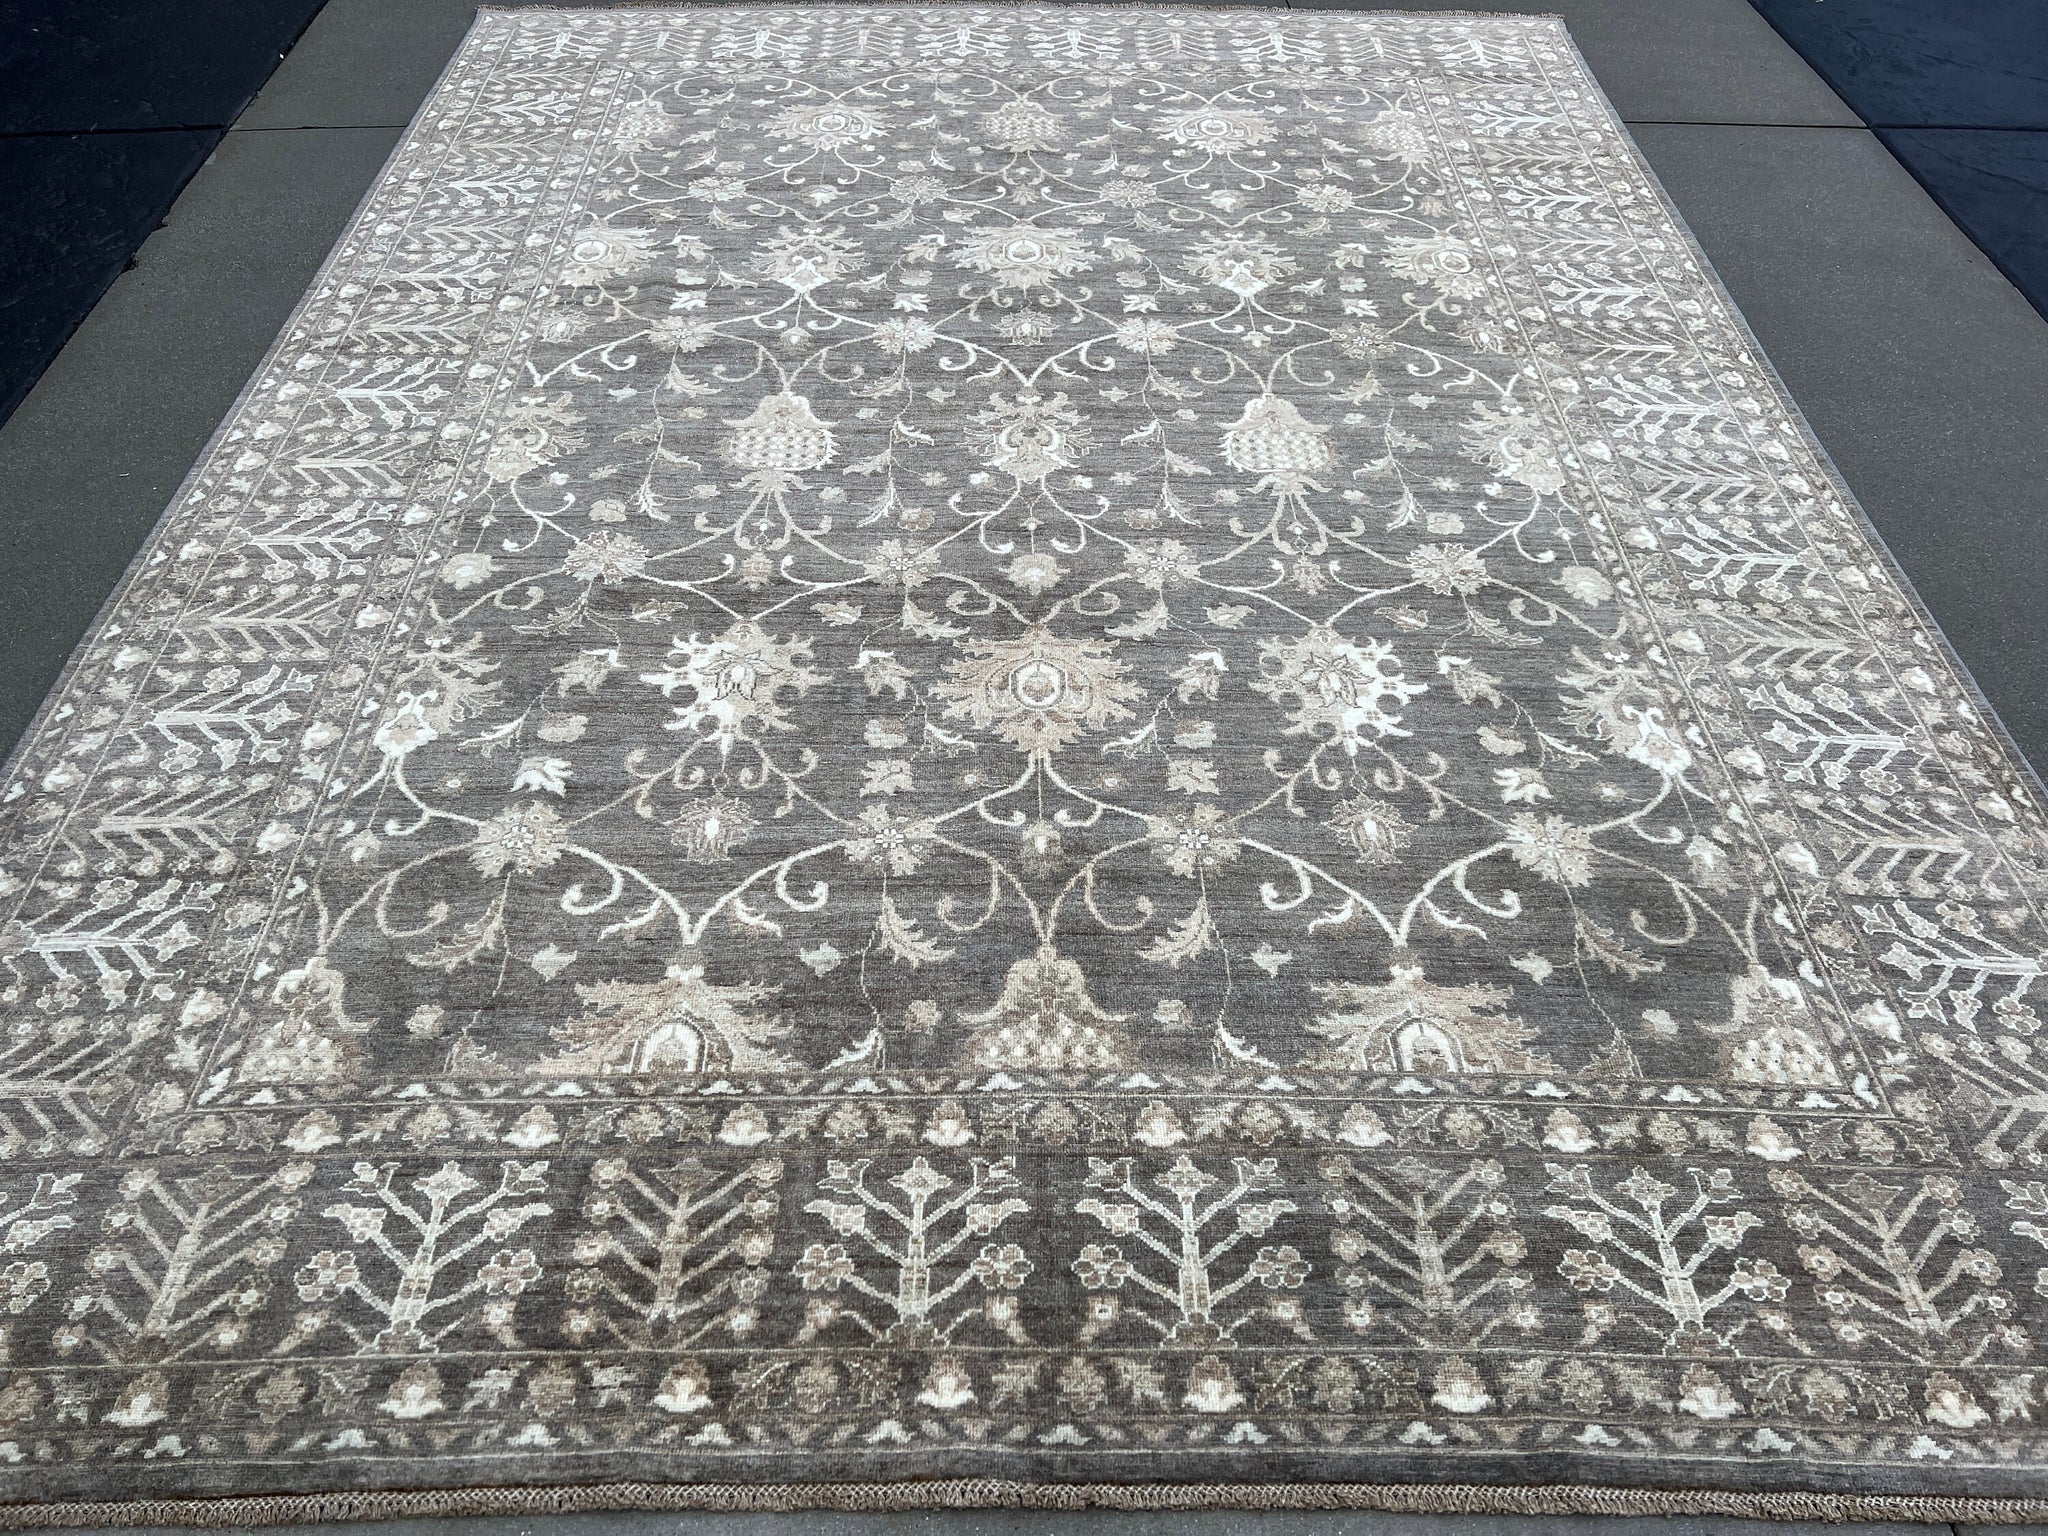 9x12 Handmade Afghan Rug | Grey Gray Ivory White Light Brown | Turkish Oushak Vintage Persian Tribal Floral Hand Knotted Modern Boho Classic